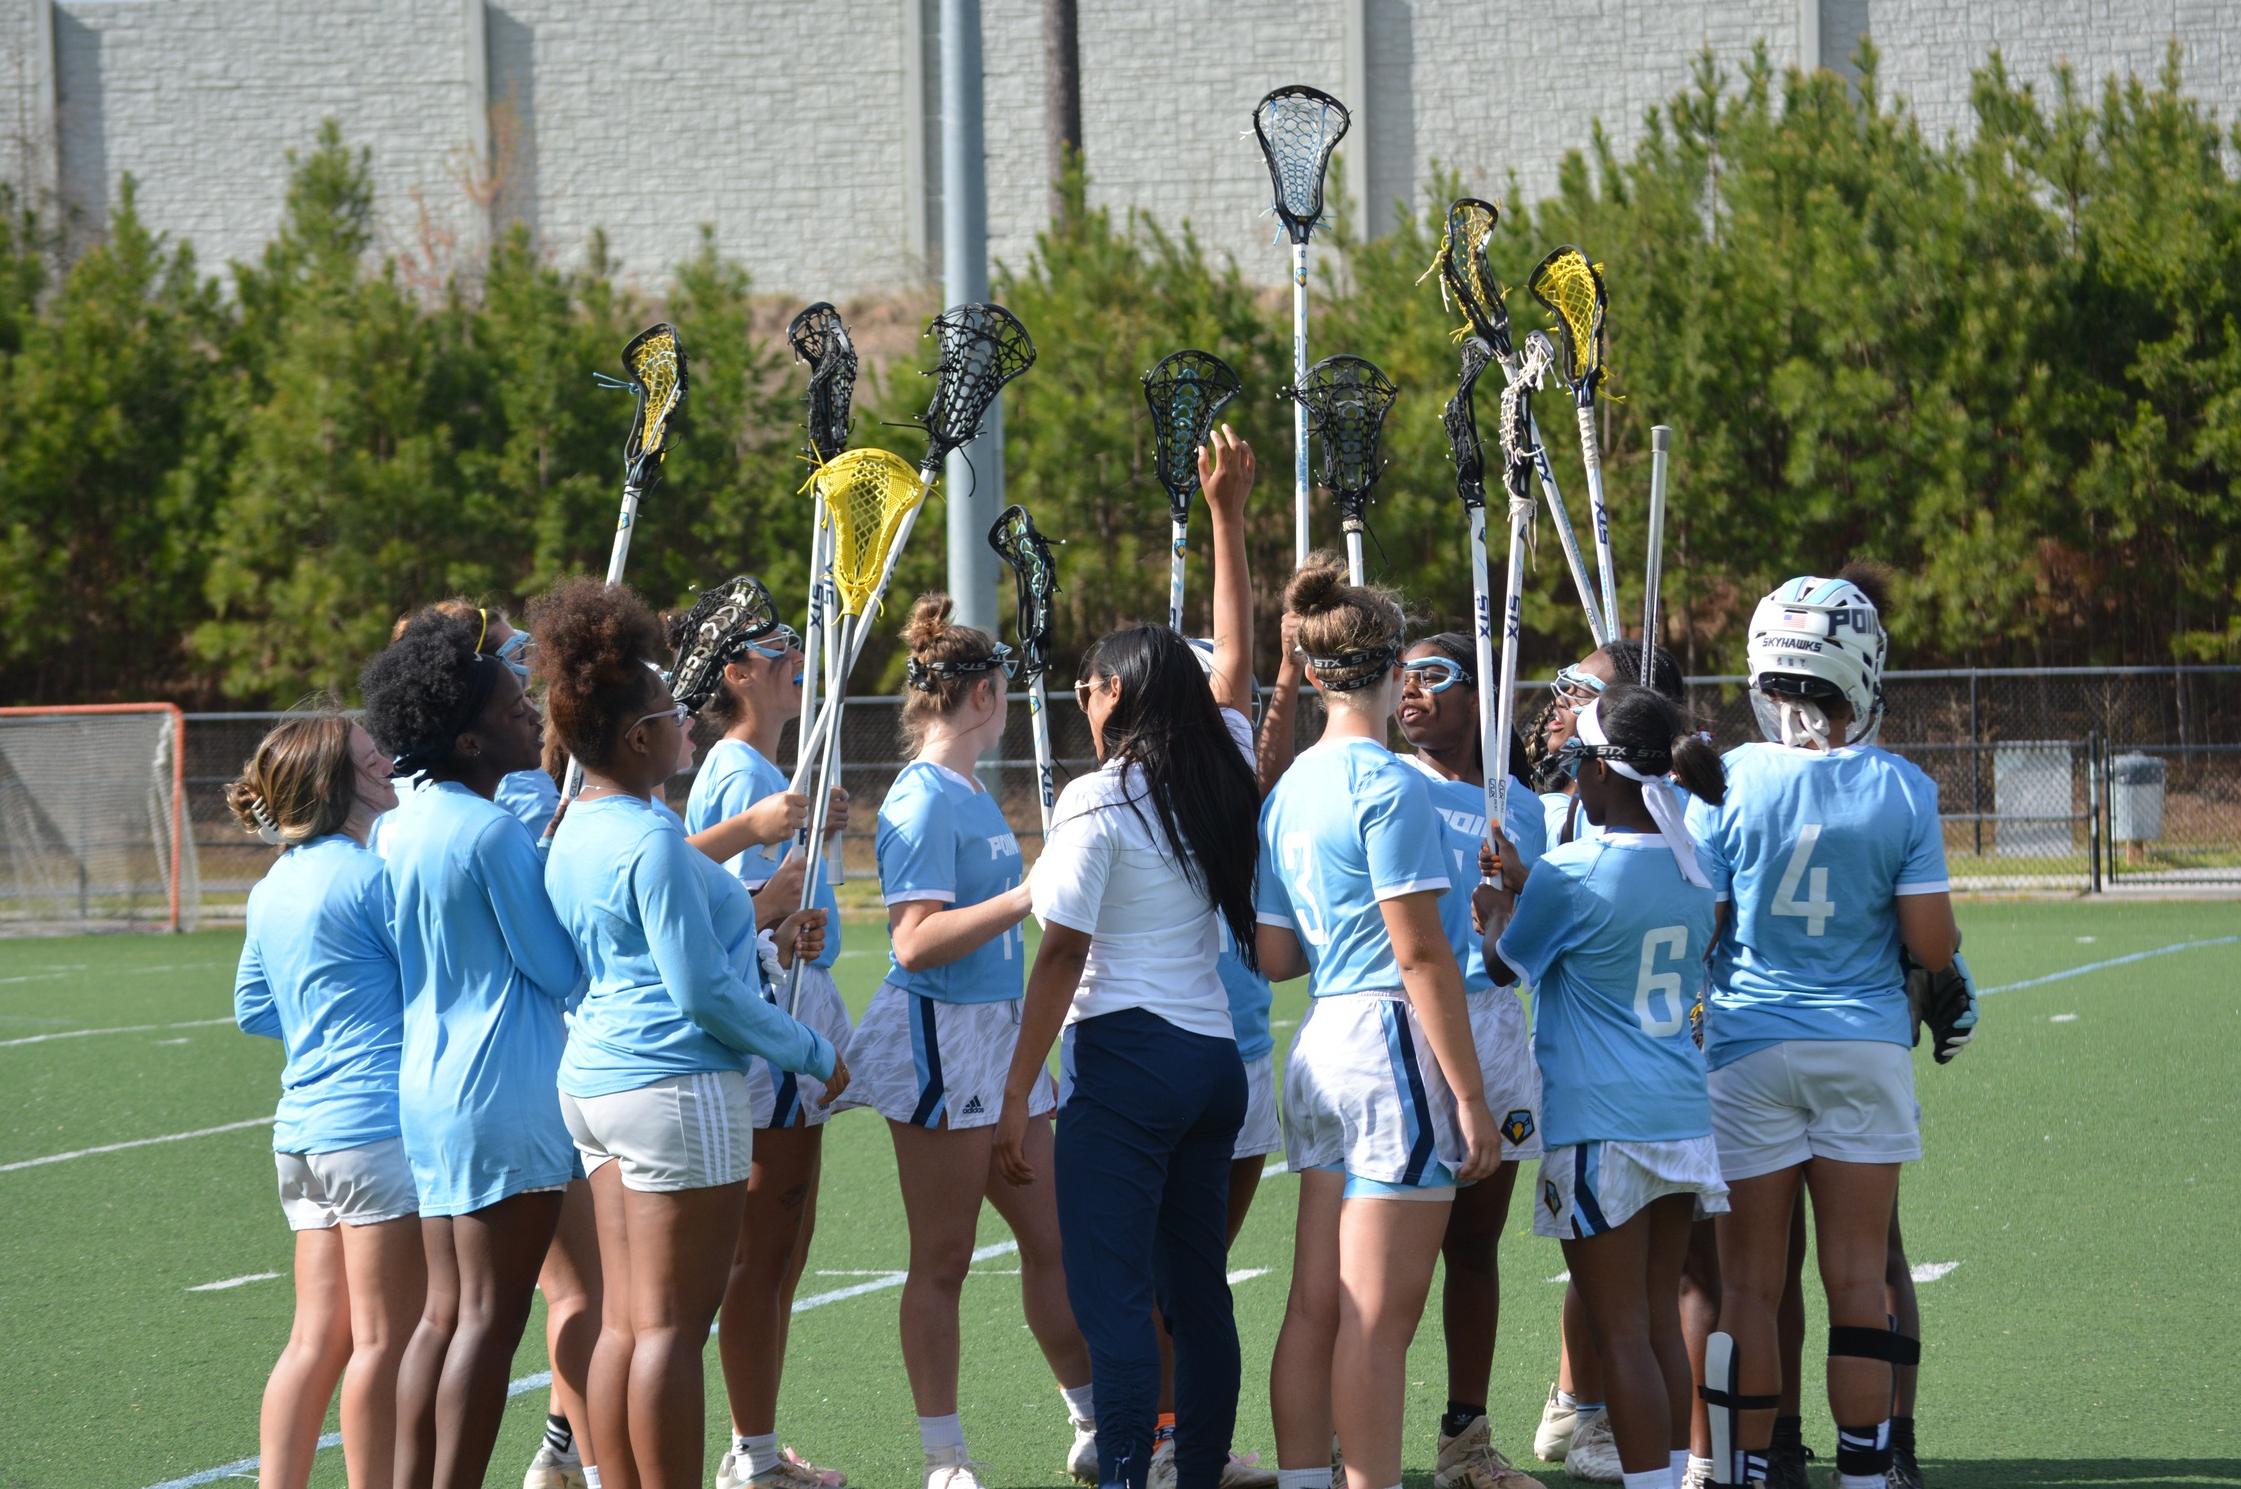 Women’s lacrosse falls in quarterfinal round of AAC tournament